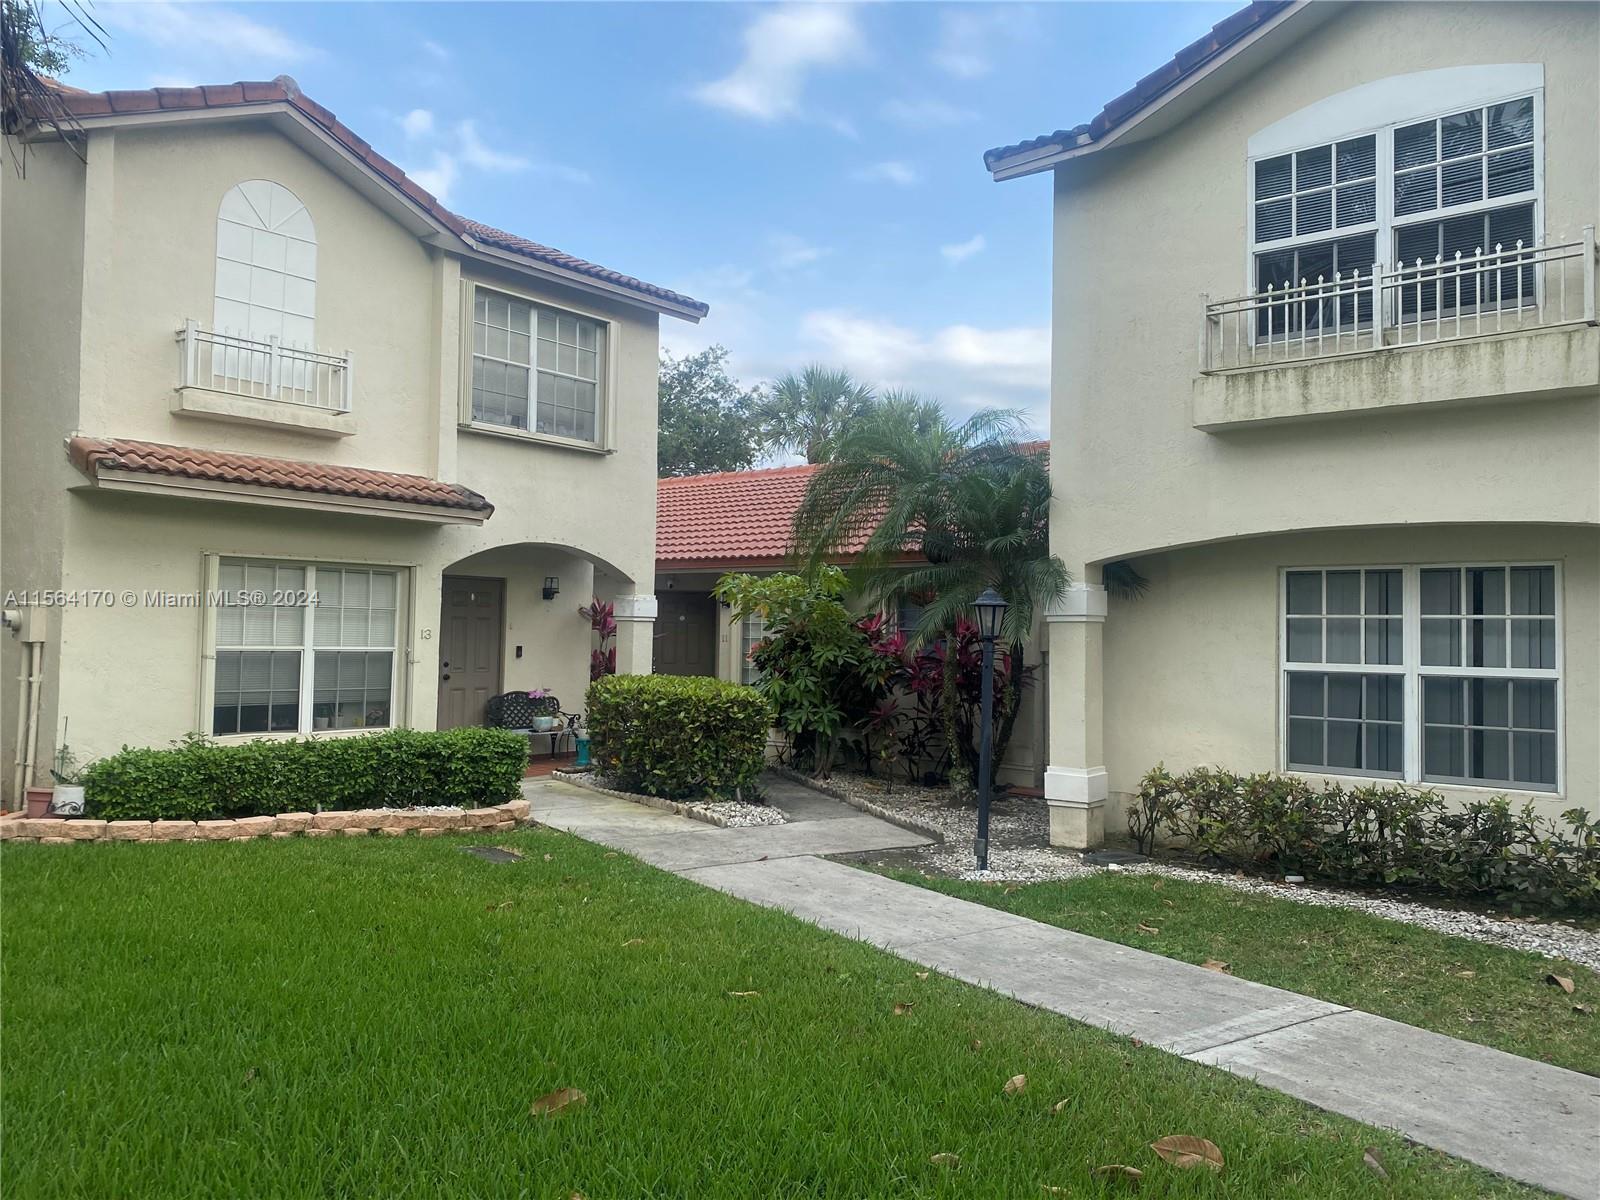 Photo of 111 NW 108th Ave #111 in Pembroke Pines, FL